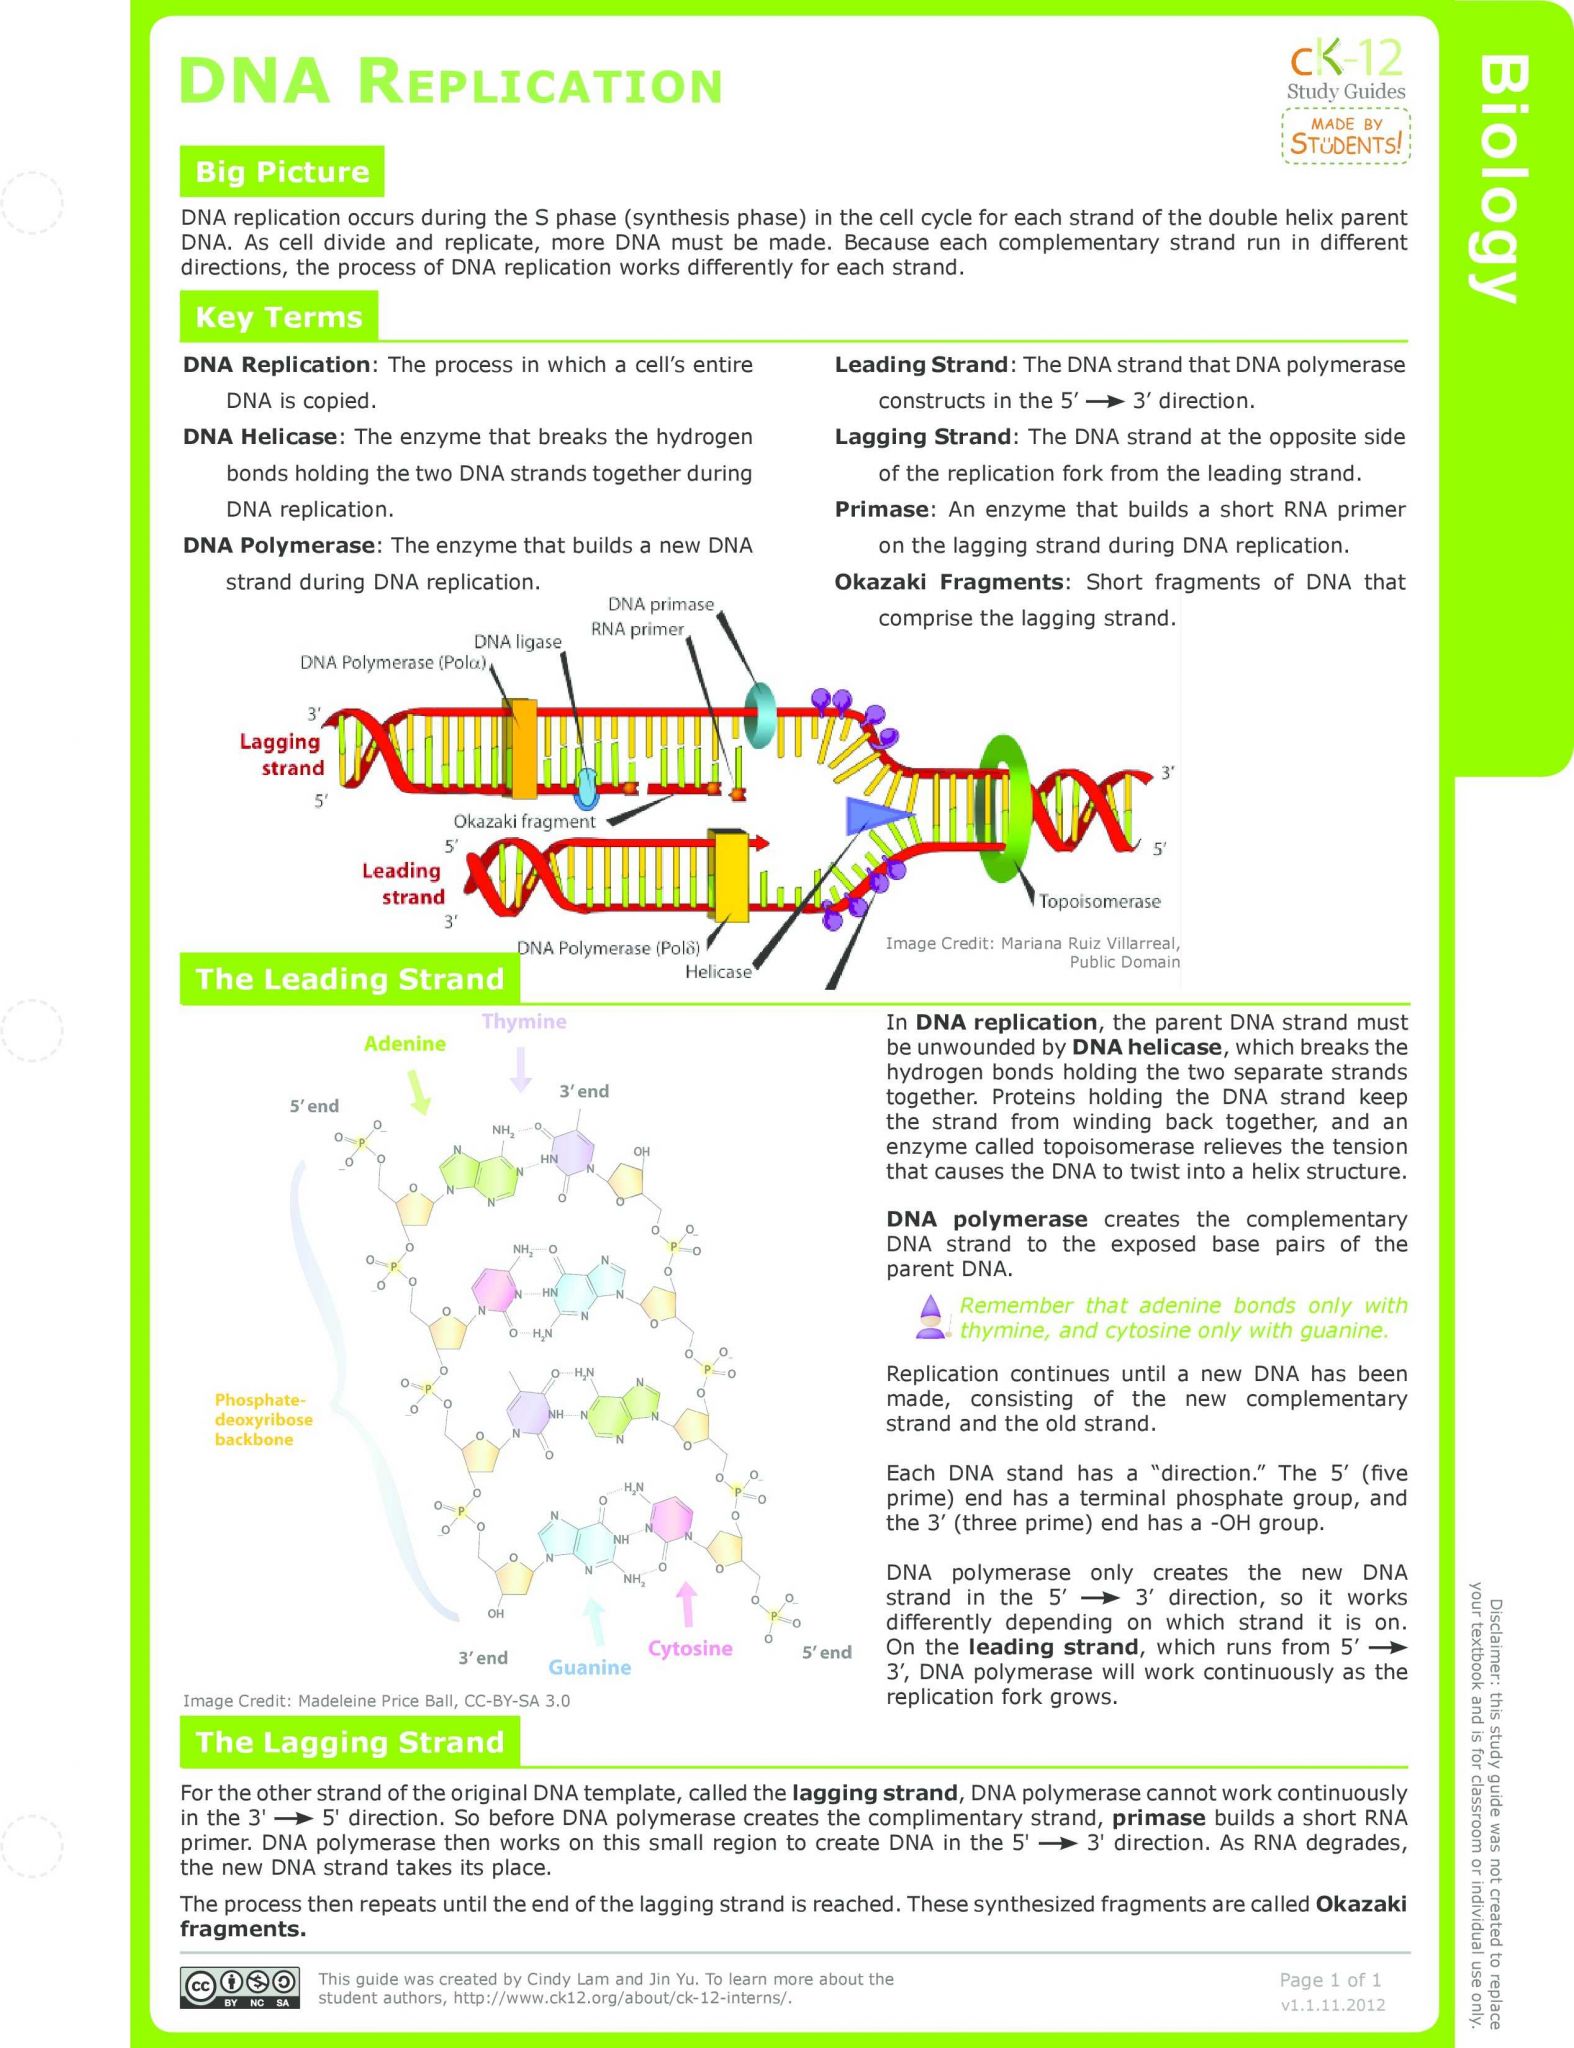 Dna Molecule and Replication Worksheet Answers as Well as 17 Luxury Dna Structure and Replication Worksheet Answers